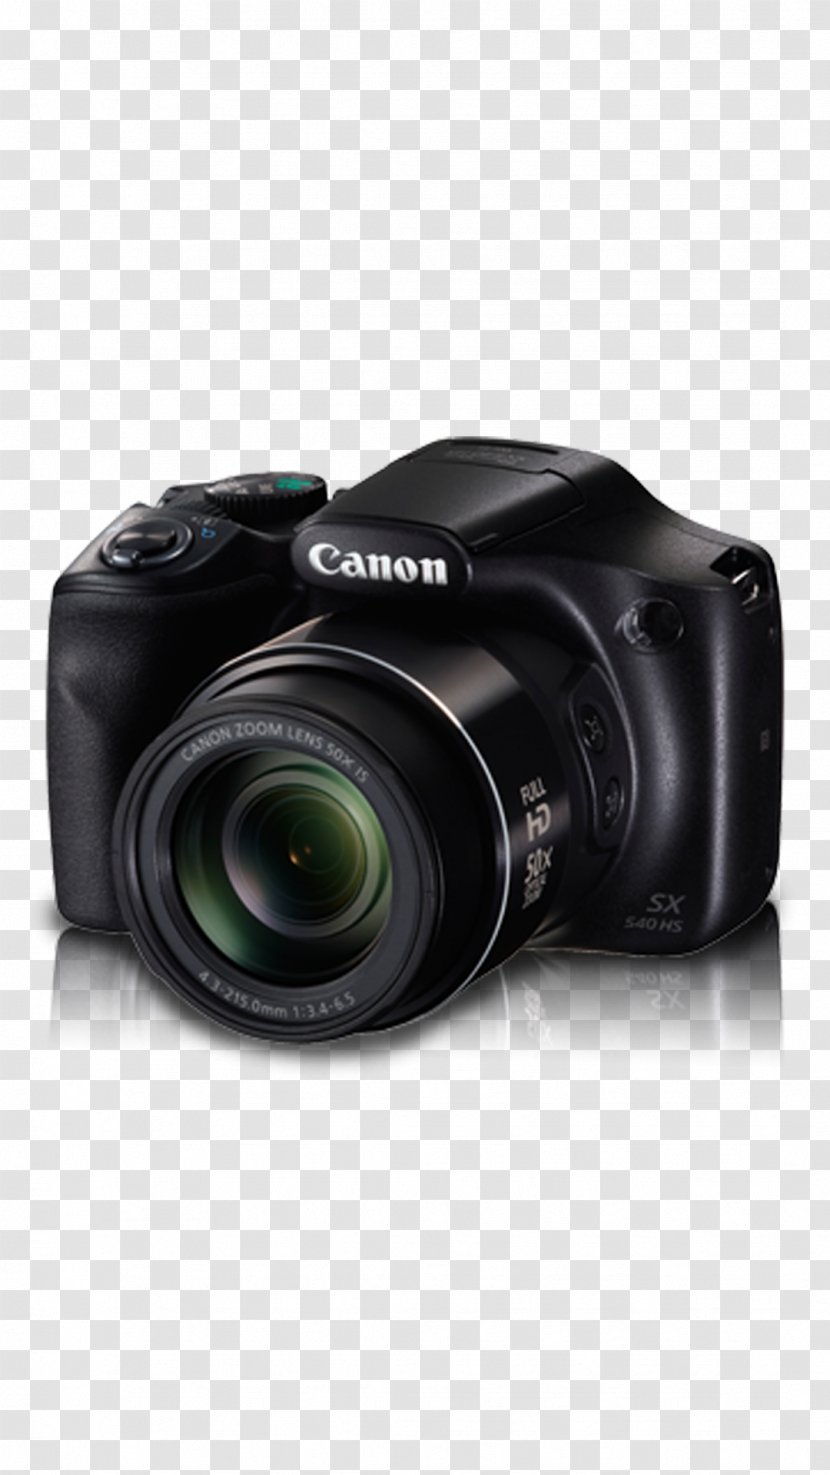 Canon PowerShot SX540 HS 20.3 MP Compact Digital Camera - Mirrorless Interchangeable Lens - 1080pBlack SX730 SX430 IS Point-and-shoot CameraShoot Transparent PNG